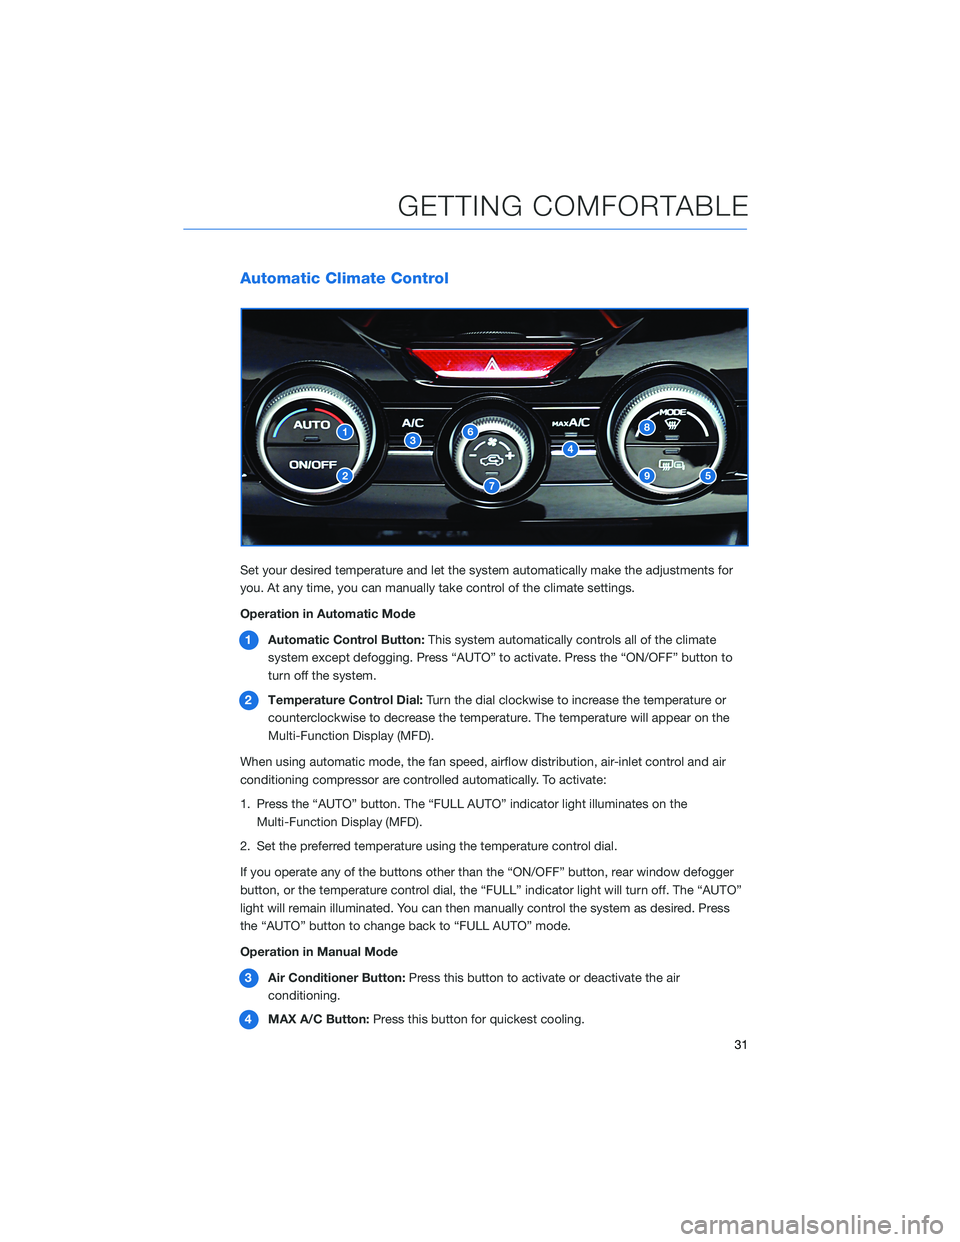 SUBARU IMPREZA 2022  Getting Started Guide Automatic Climate Control
Set your desired temperature and let the system automatically make the adjustments for
you. At any time, you can manually take control of the climate settings.
Operation in A